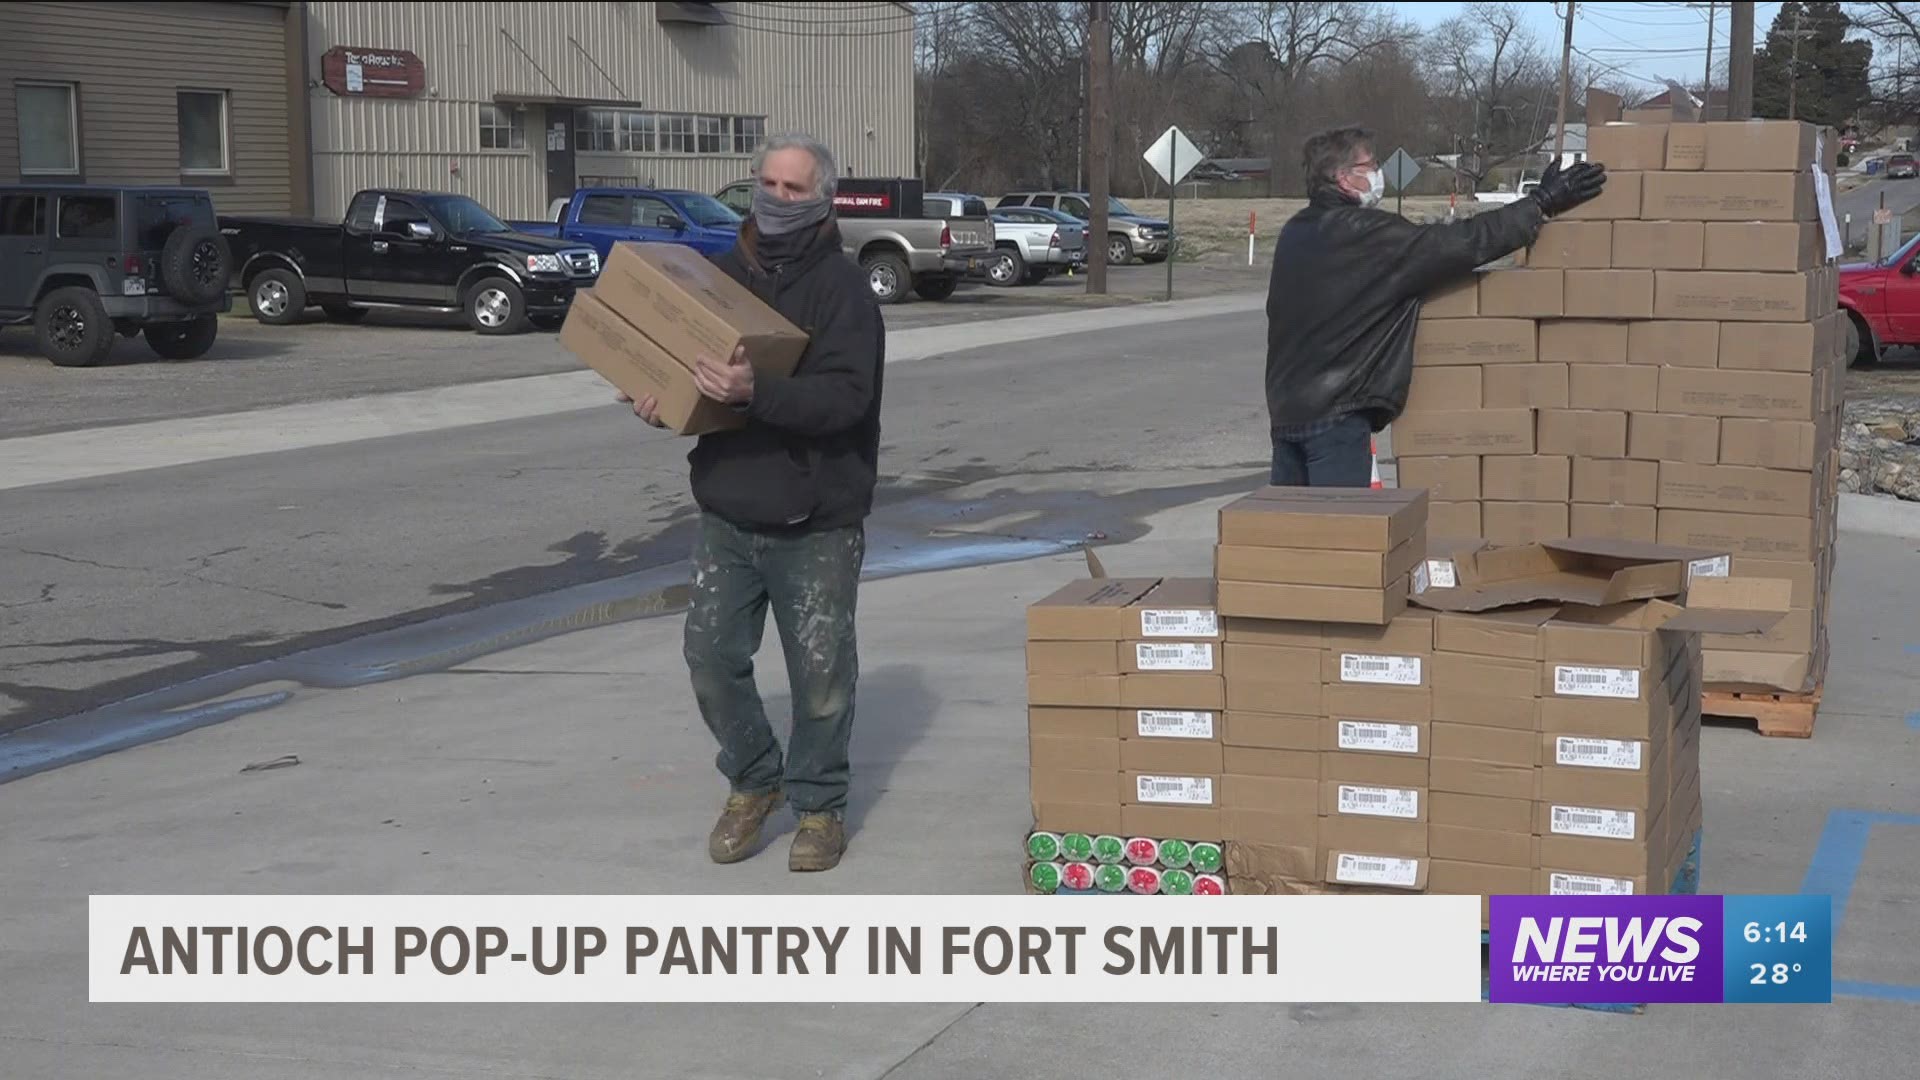 After Antioch conducted its end of year inventory it realized there was an opportunity for another pop-up pantry event. https://bit.ly/38AEMDj